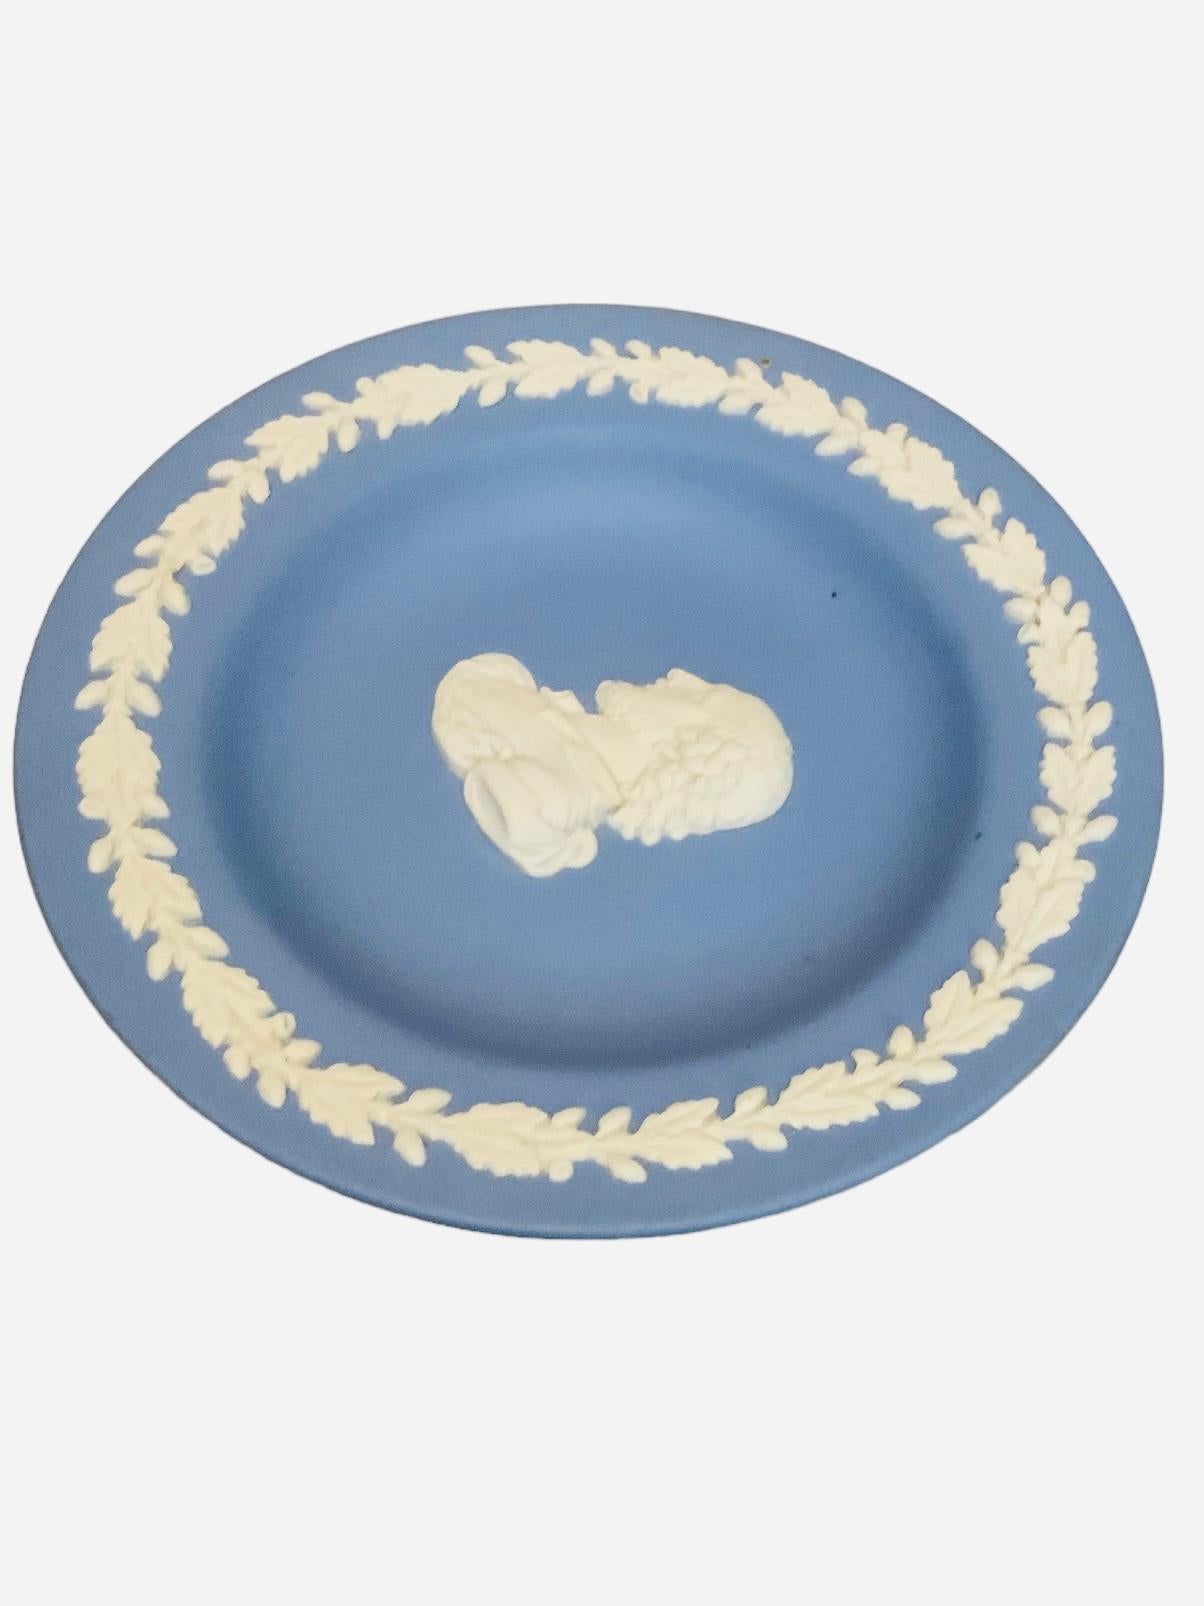 Blue Wedgwood Jasperware Small Plate In Good Condition For Sale In Guaynabo, PR